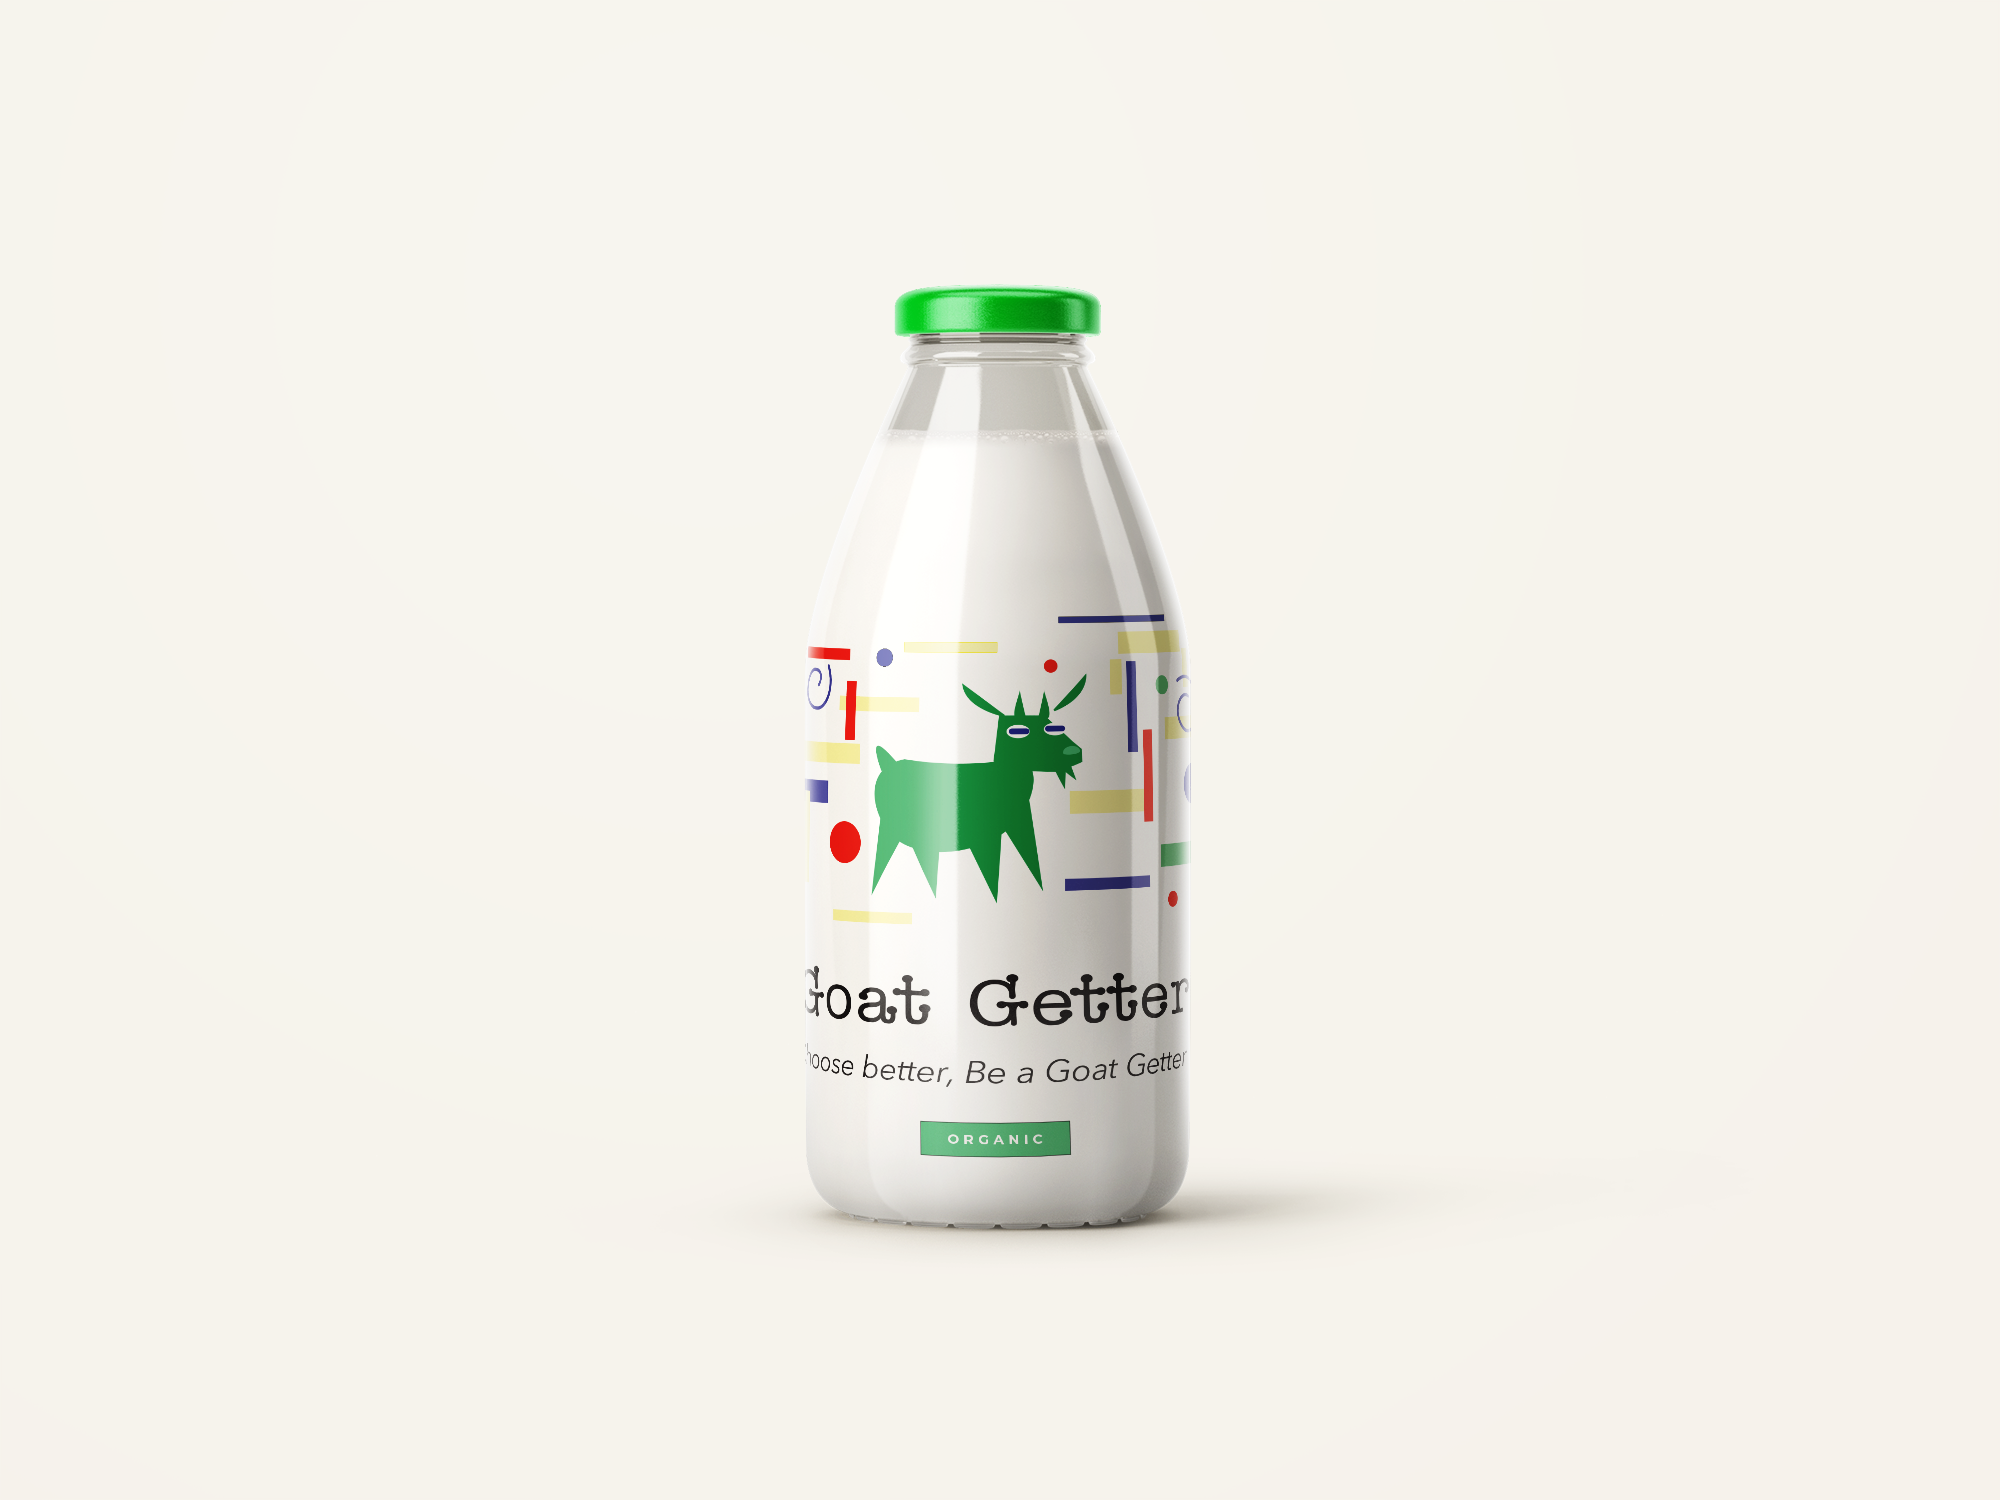 Goat getter milk bottle mockup with gulp the goat on front of the bottle